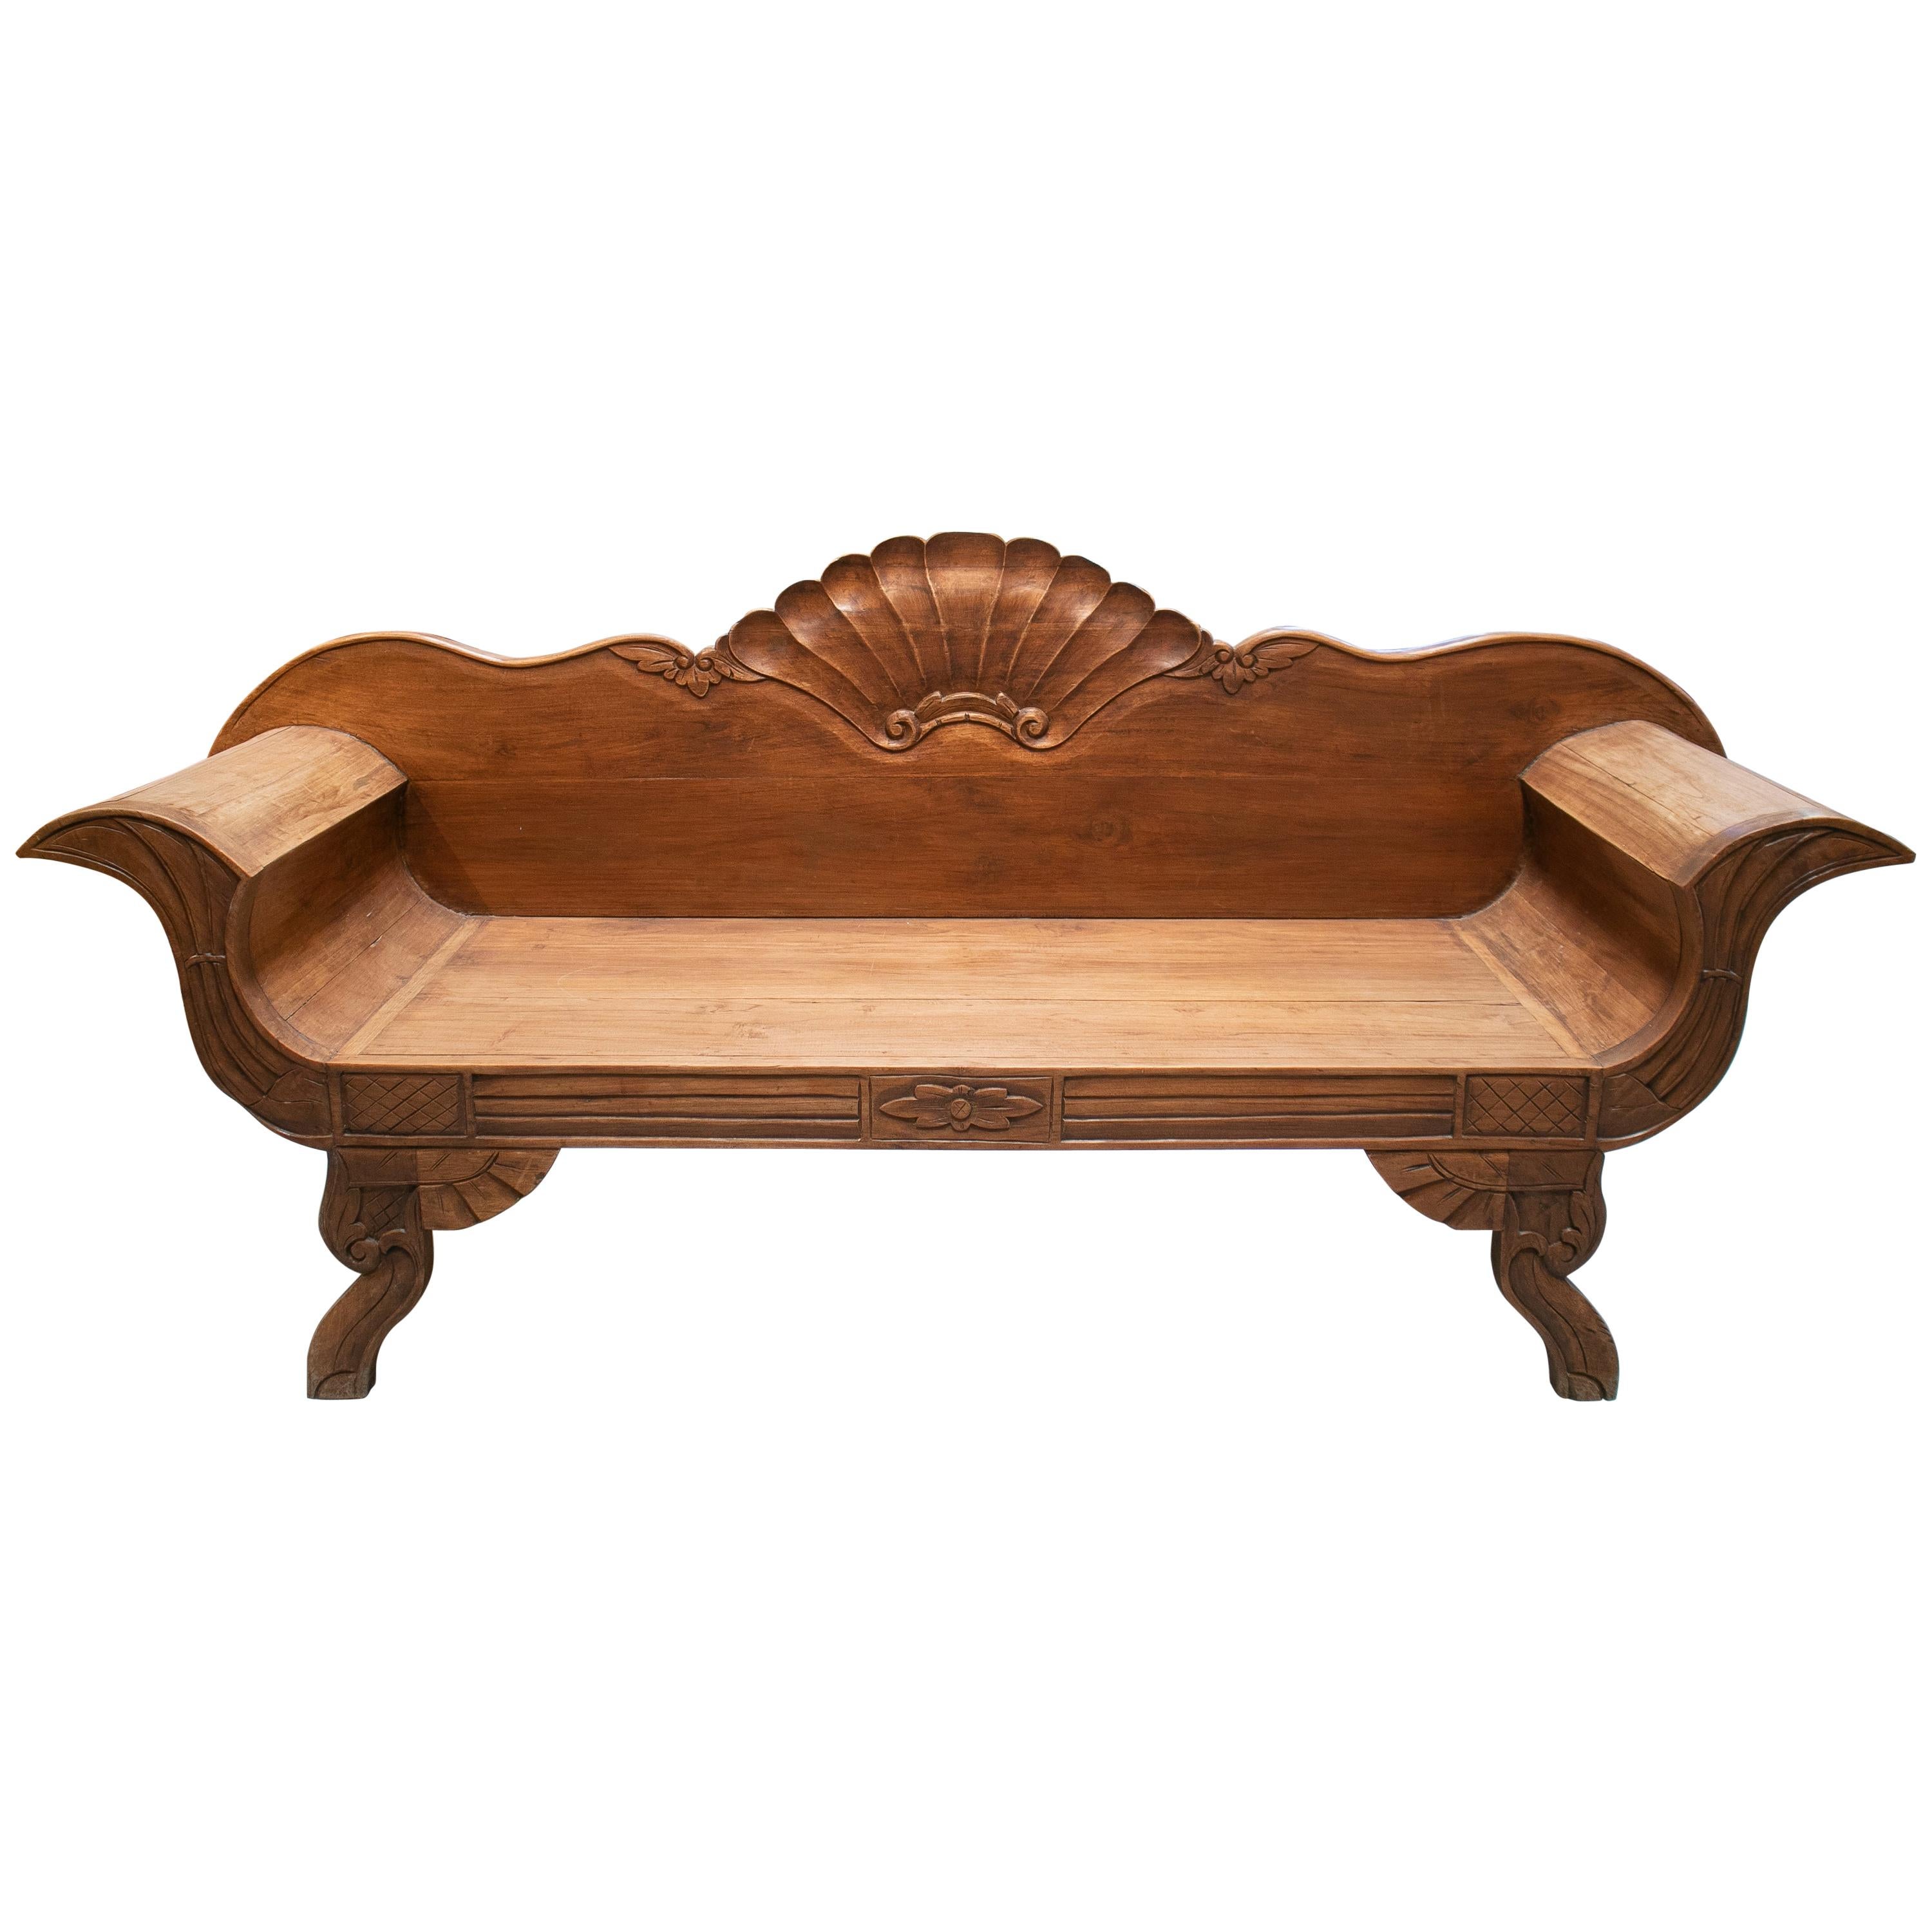 Hand Carved Wooden Garden Bench w/ Conch Crown Decorations and Armrests